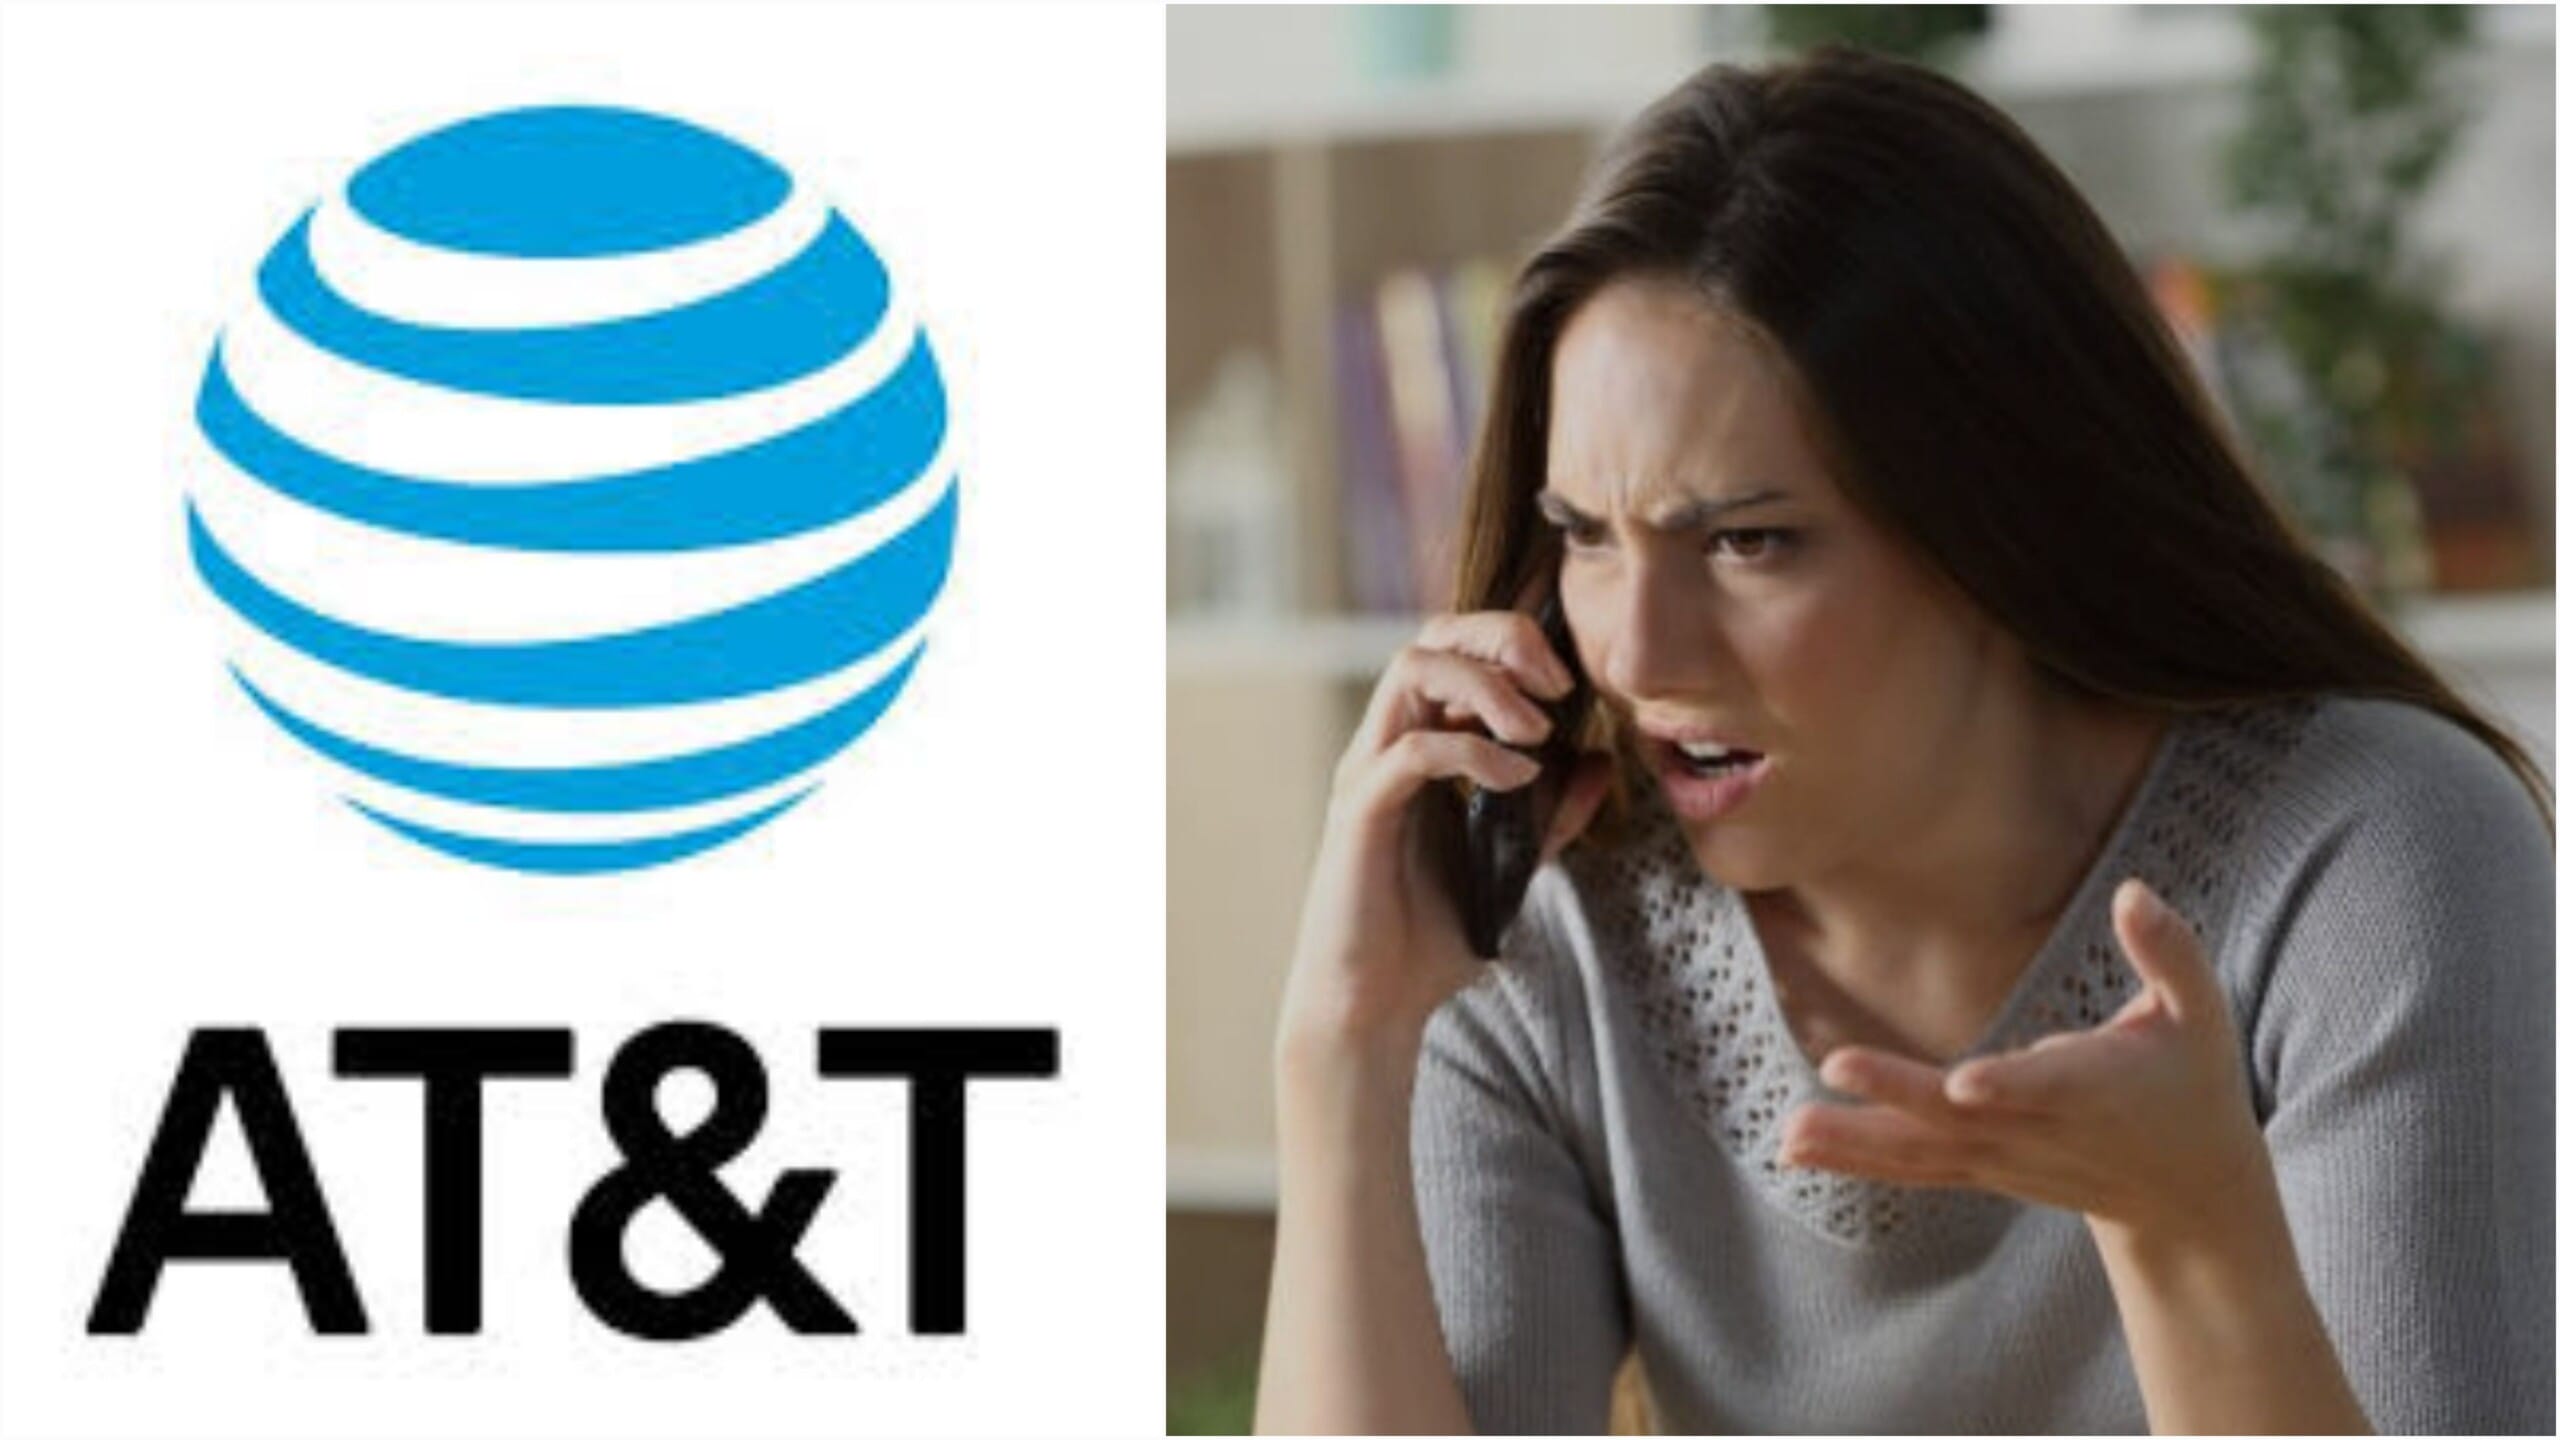 If you're an AT&T customer, do this in response to millions of data leaks in the US